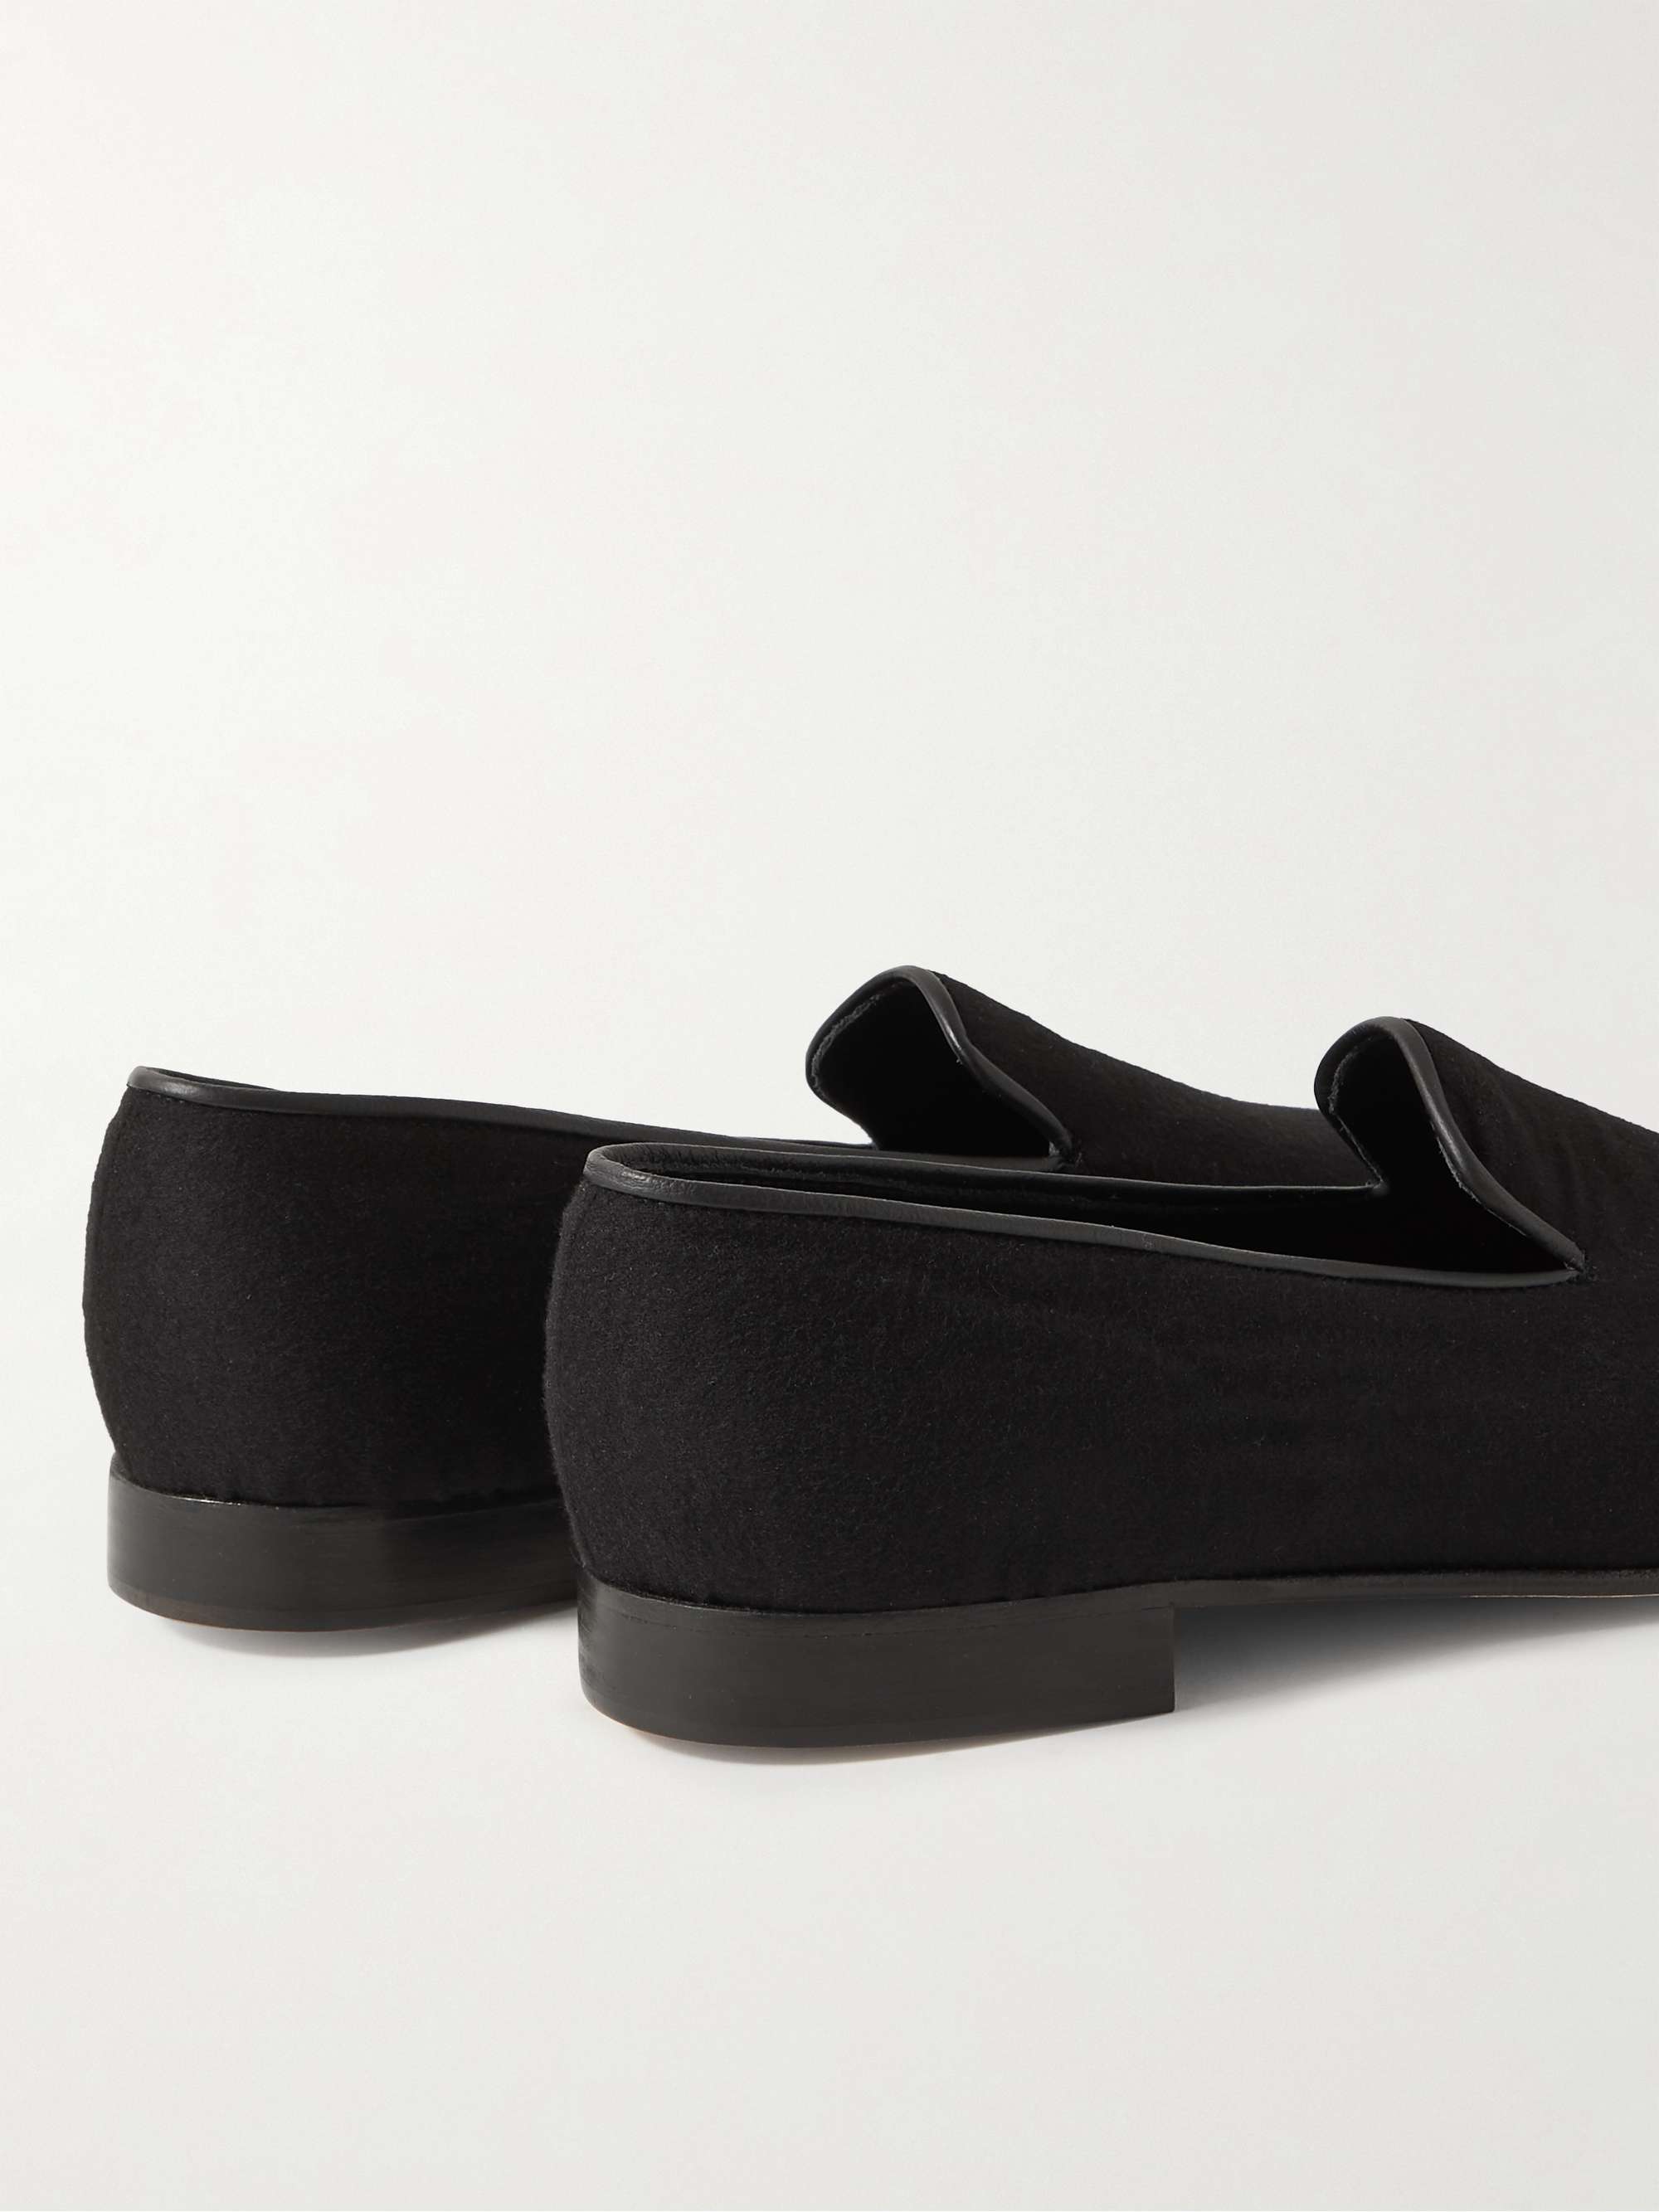 GEORGE CLEVERLEY Albert Leather-Trimmed Cashmere Loafers